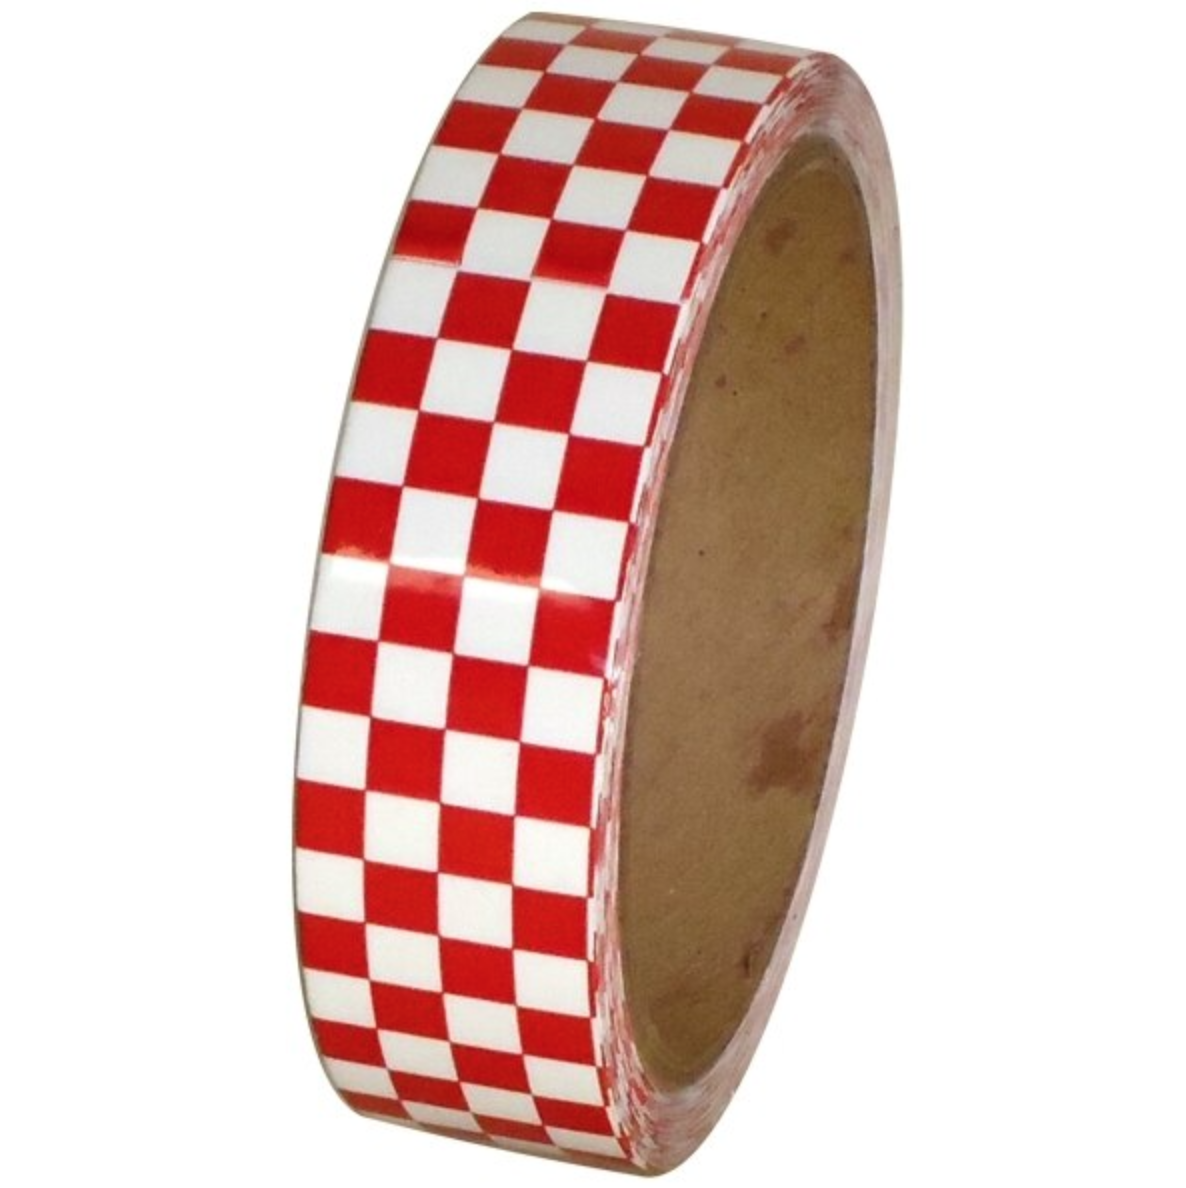 Red/White Checkerboard Tape from Columbia Safety